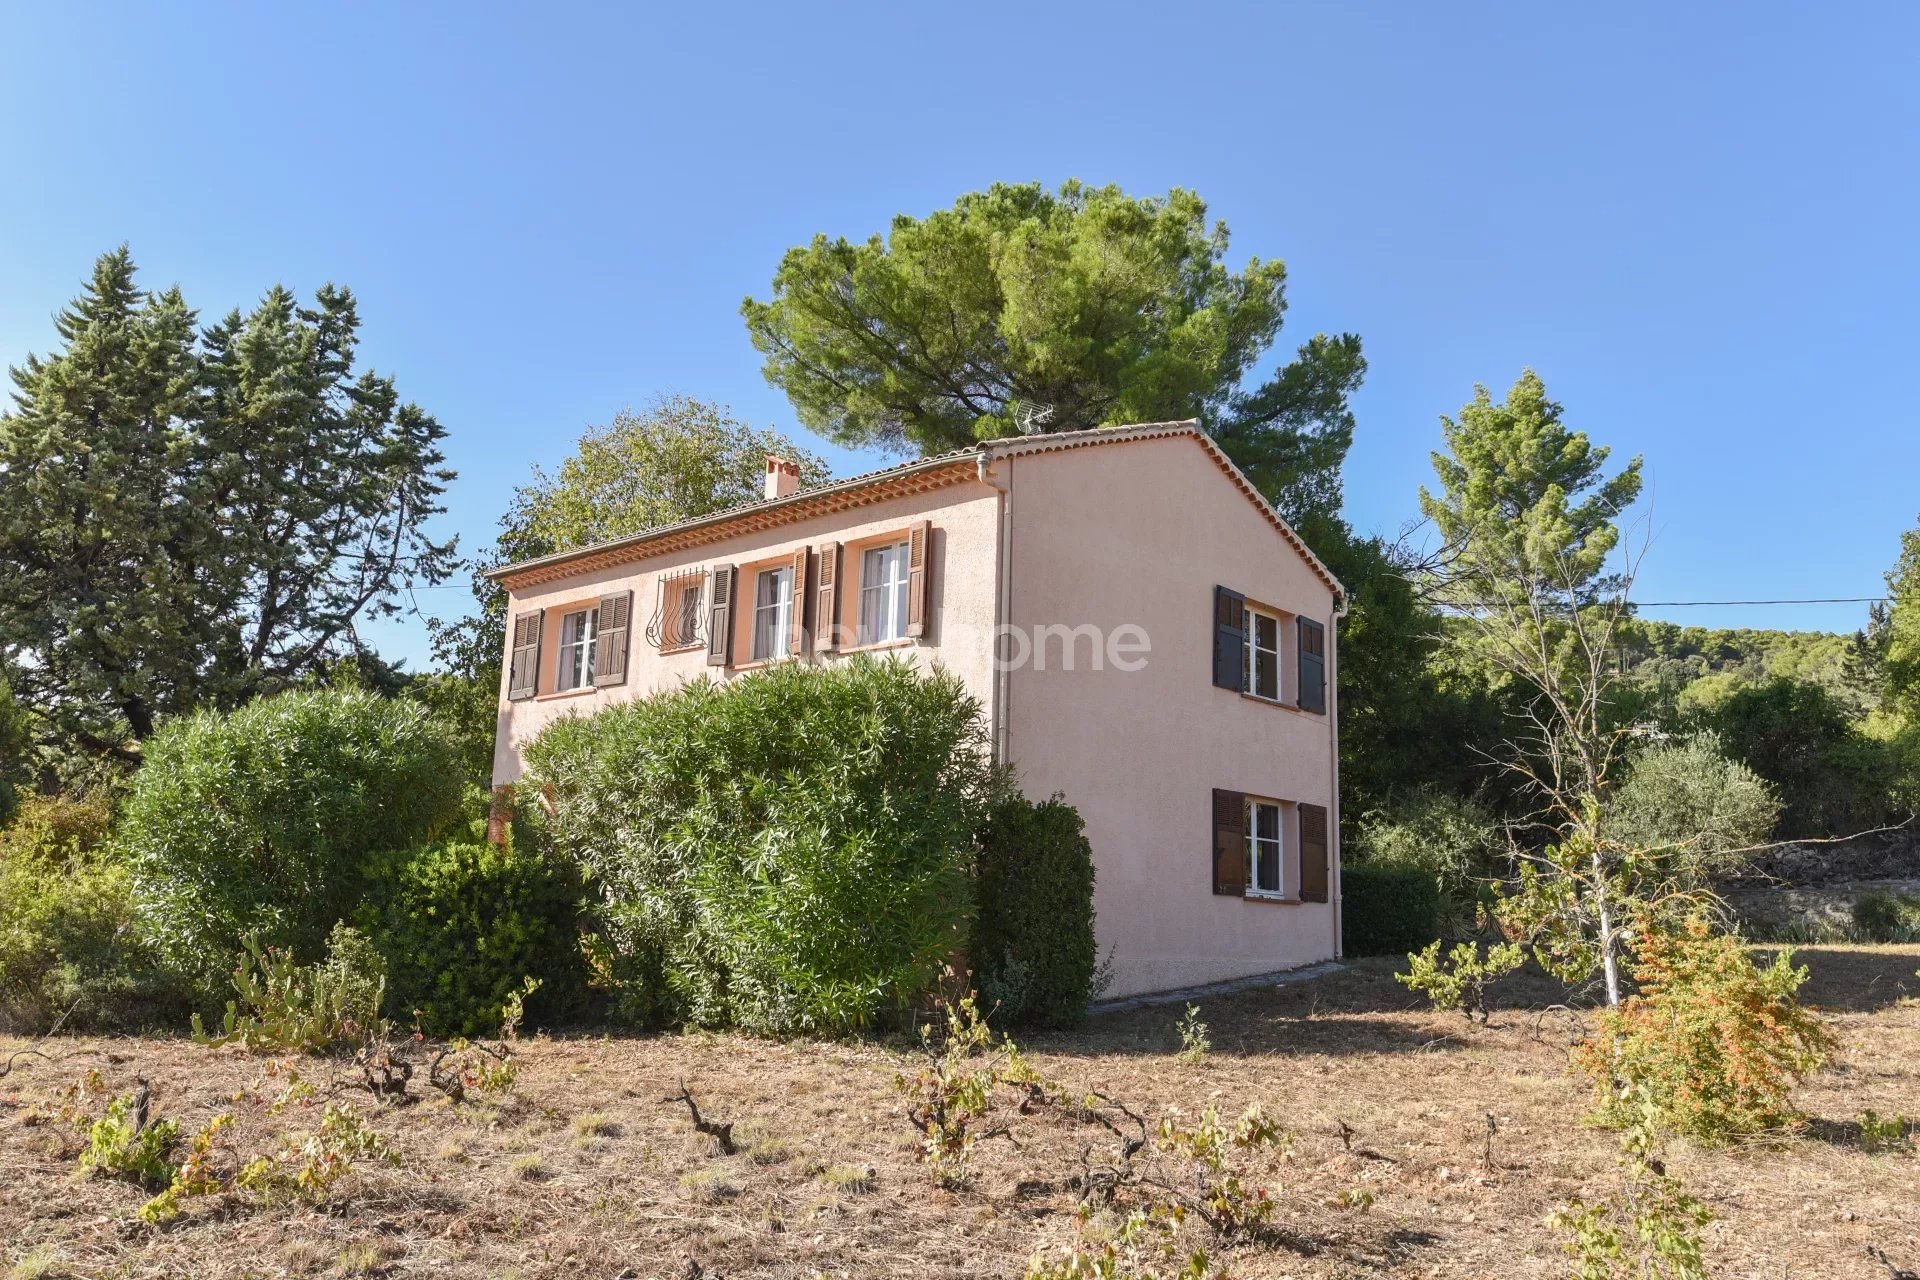 Pretty house with garage on a plot of 2439 m2